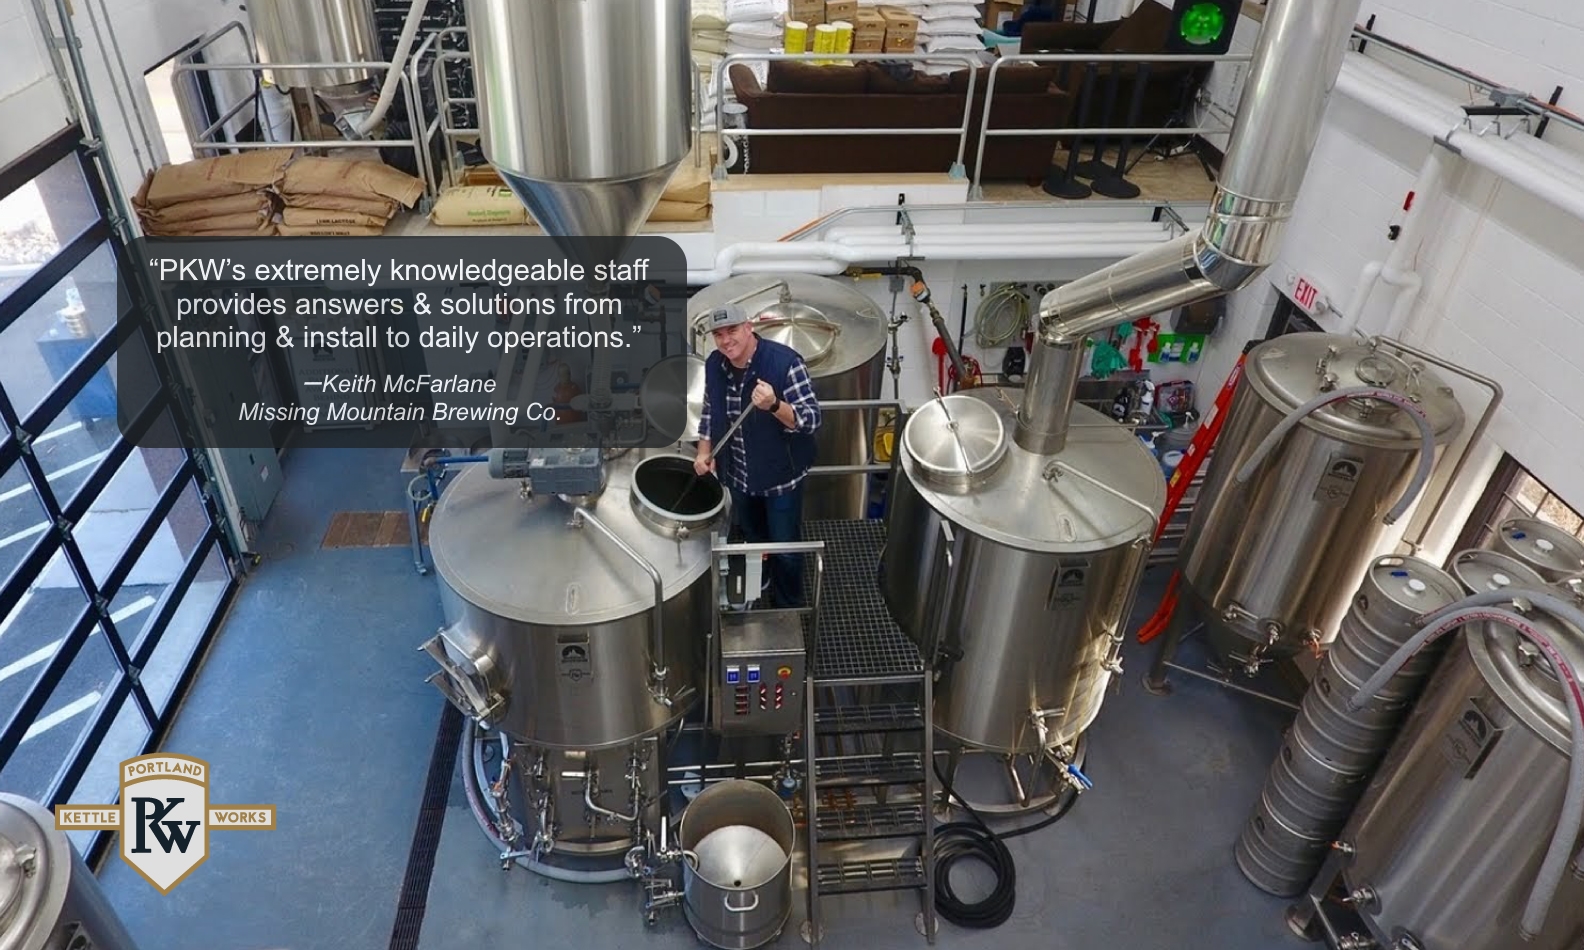 PKW Brewing Equipment at Missing Mountain Brewery with Client Testimonial